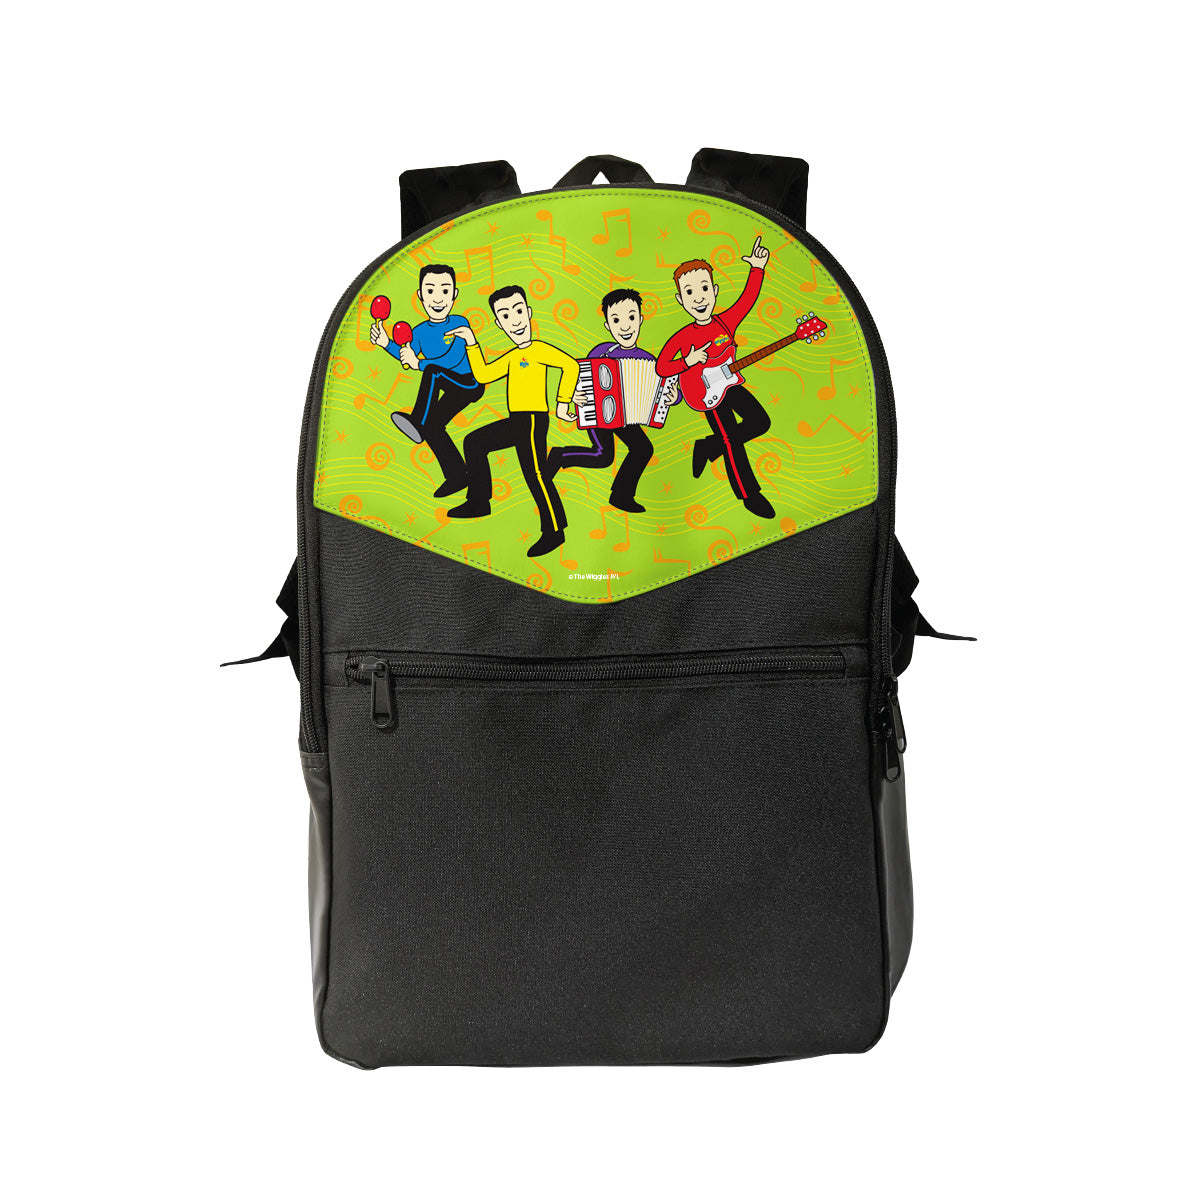 The Wiggles Original Performance Backpack